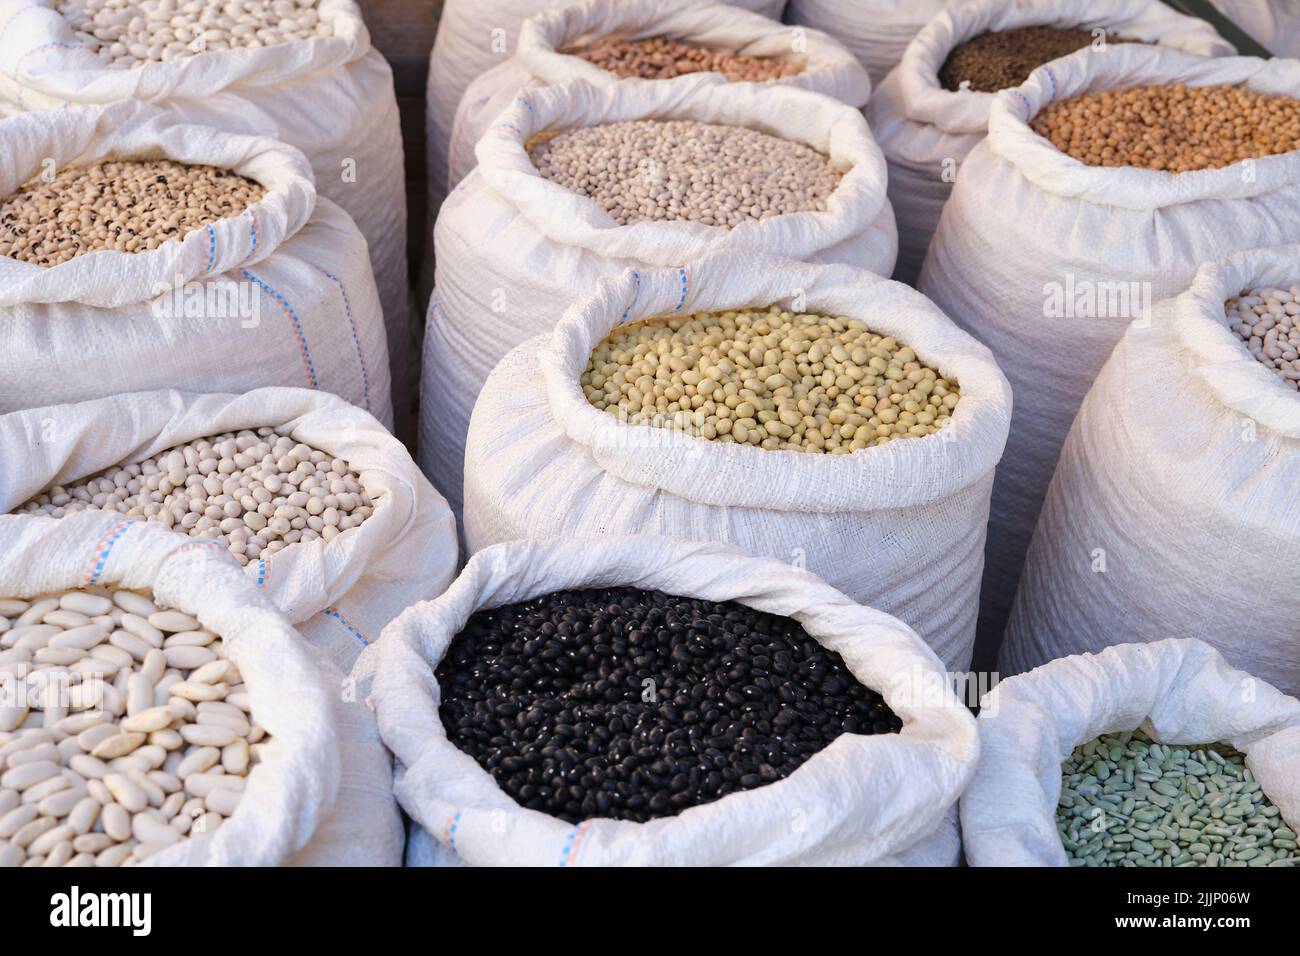 Aerial view of various types of legumes in open sacks at a local vegan market Stock Photo